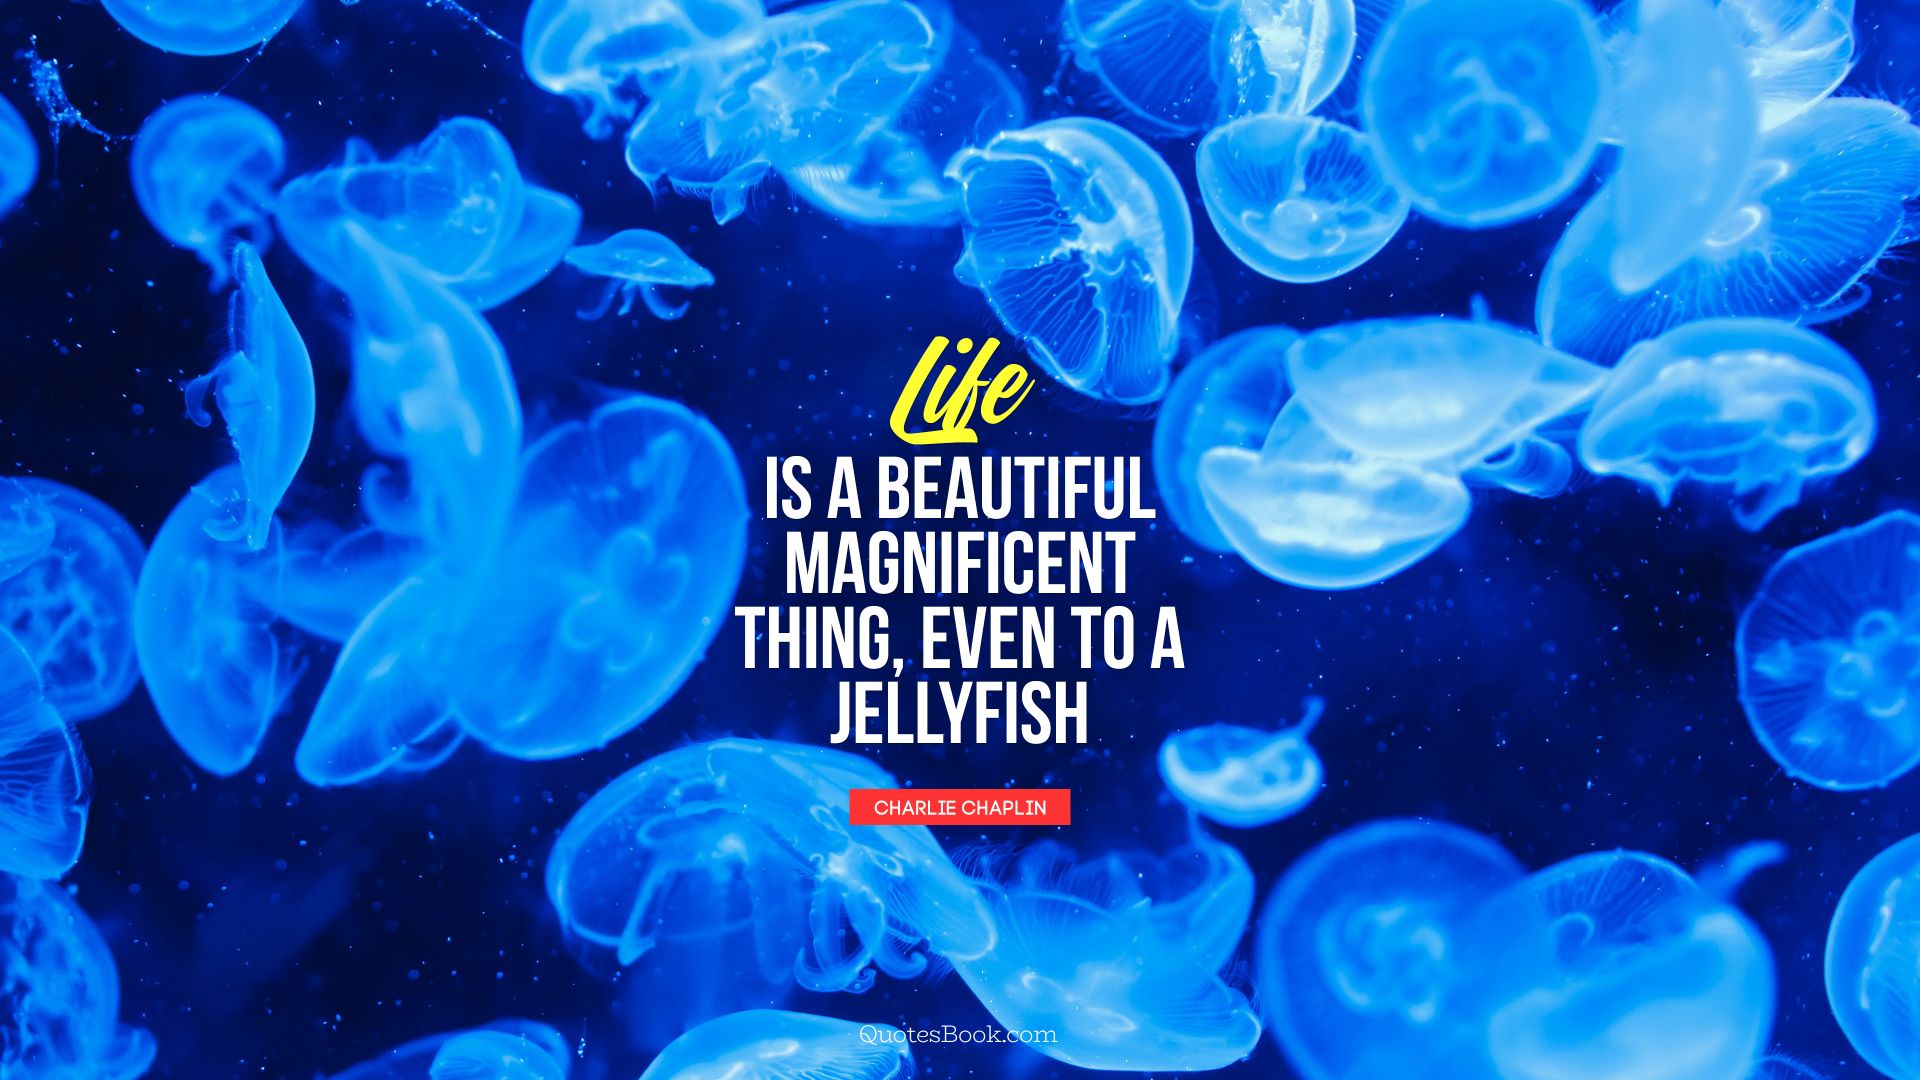 Life is a beautiful magnificent thing, even to a jellyfish. - Quote by Charlie Chaplin